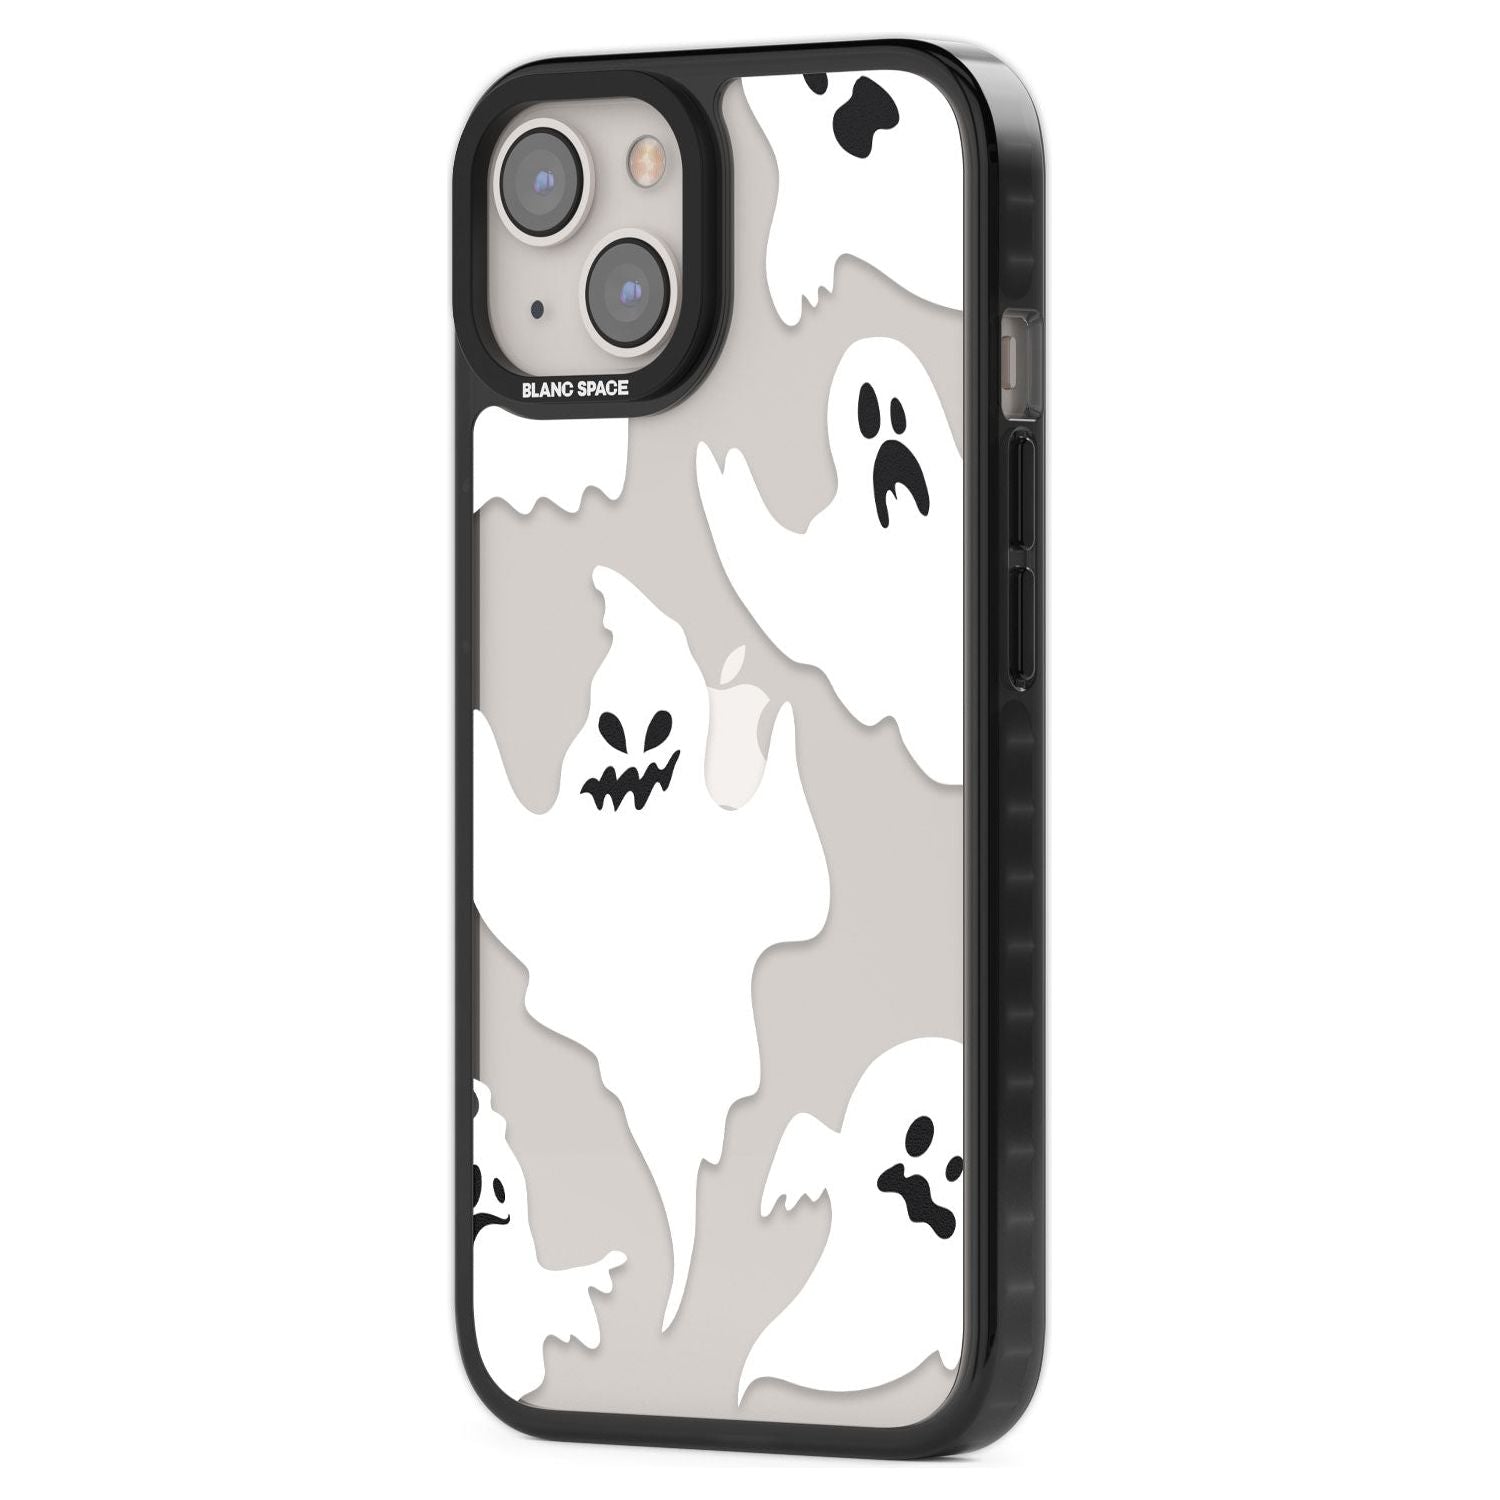 Halloween Mix PatternPhone Case for iPhone 14